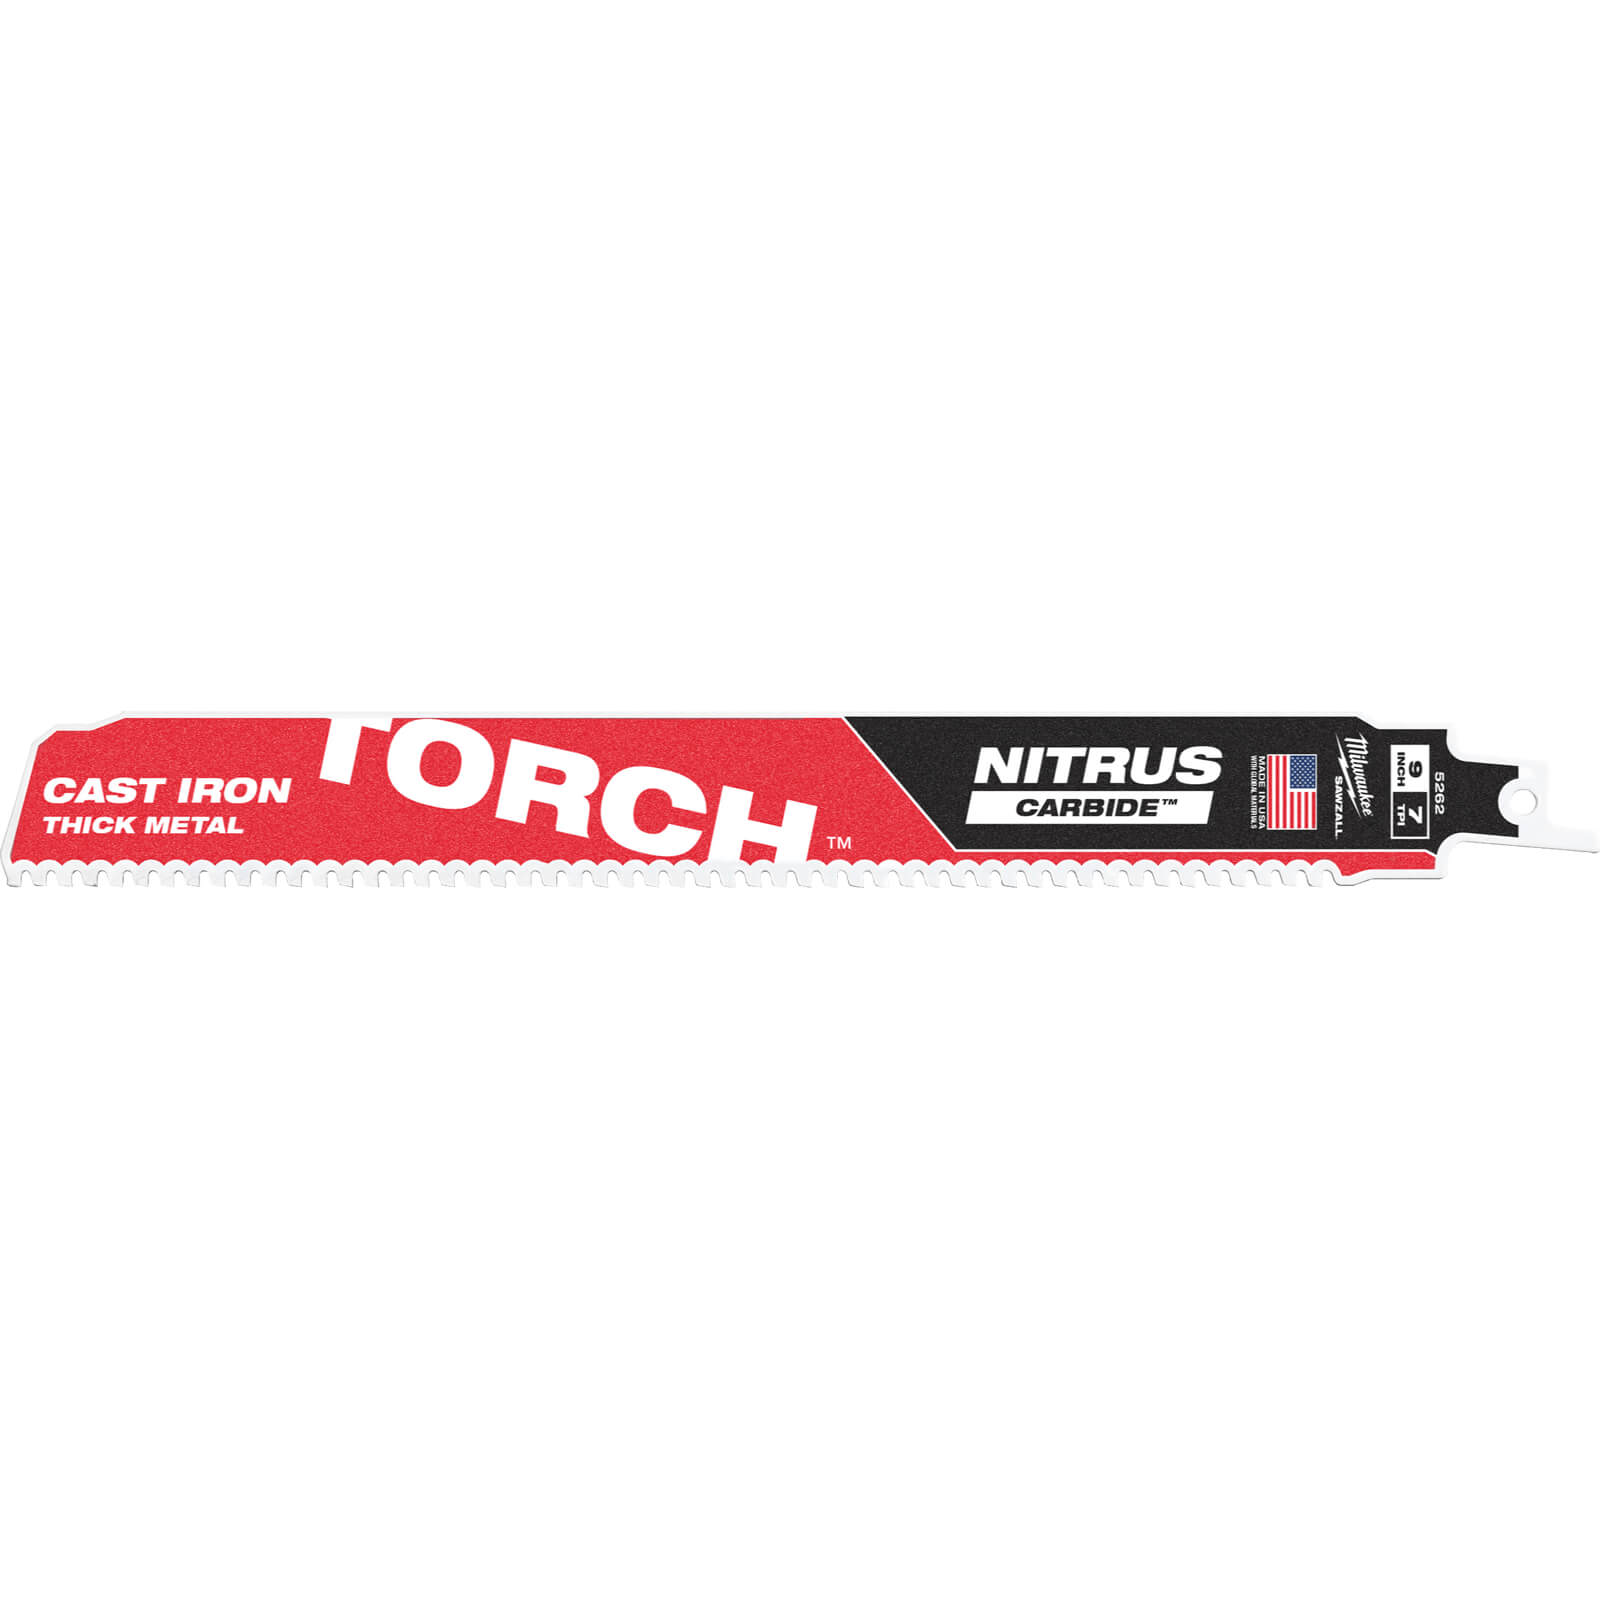 Image of Milwaukee Heavy Duty TORCH Nitrus Carbide Reciprocating Sabre Saw Blades 230mm Pack of 1